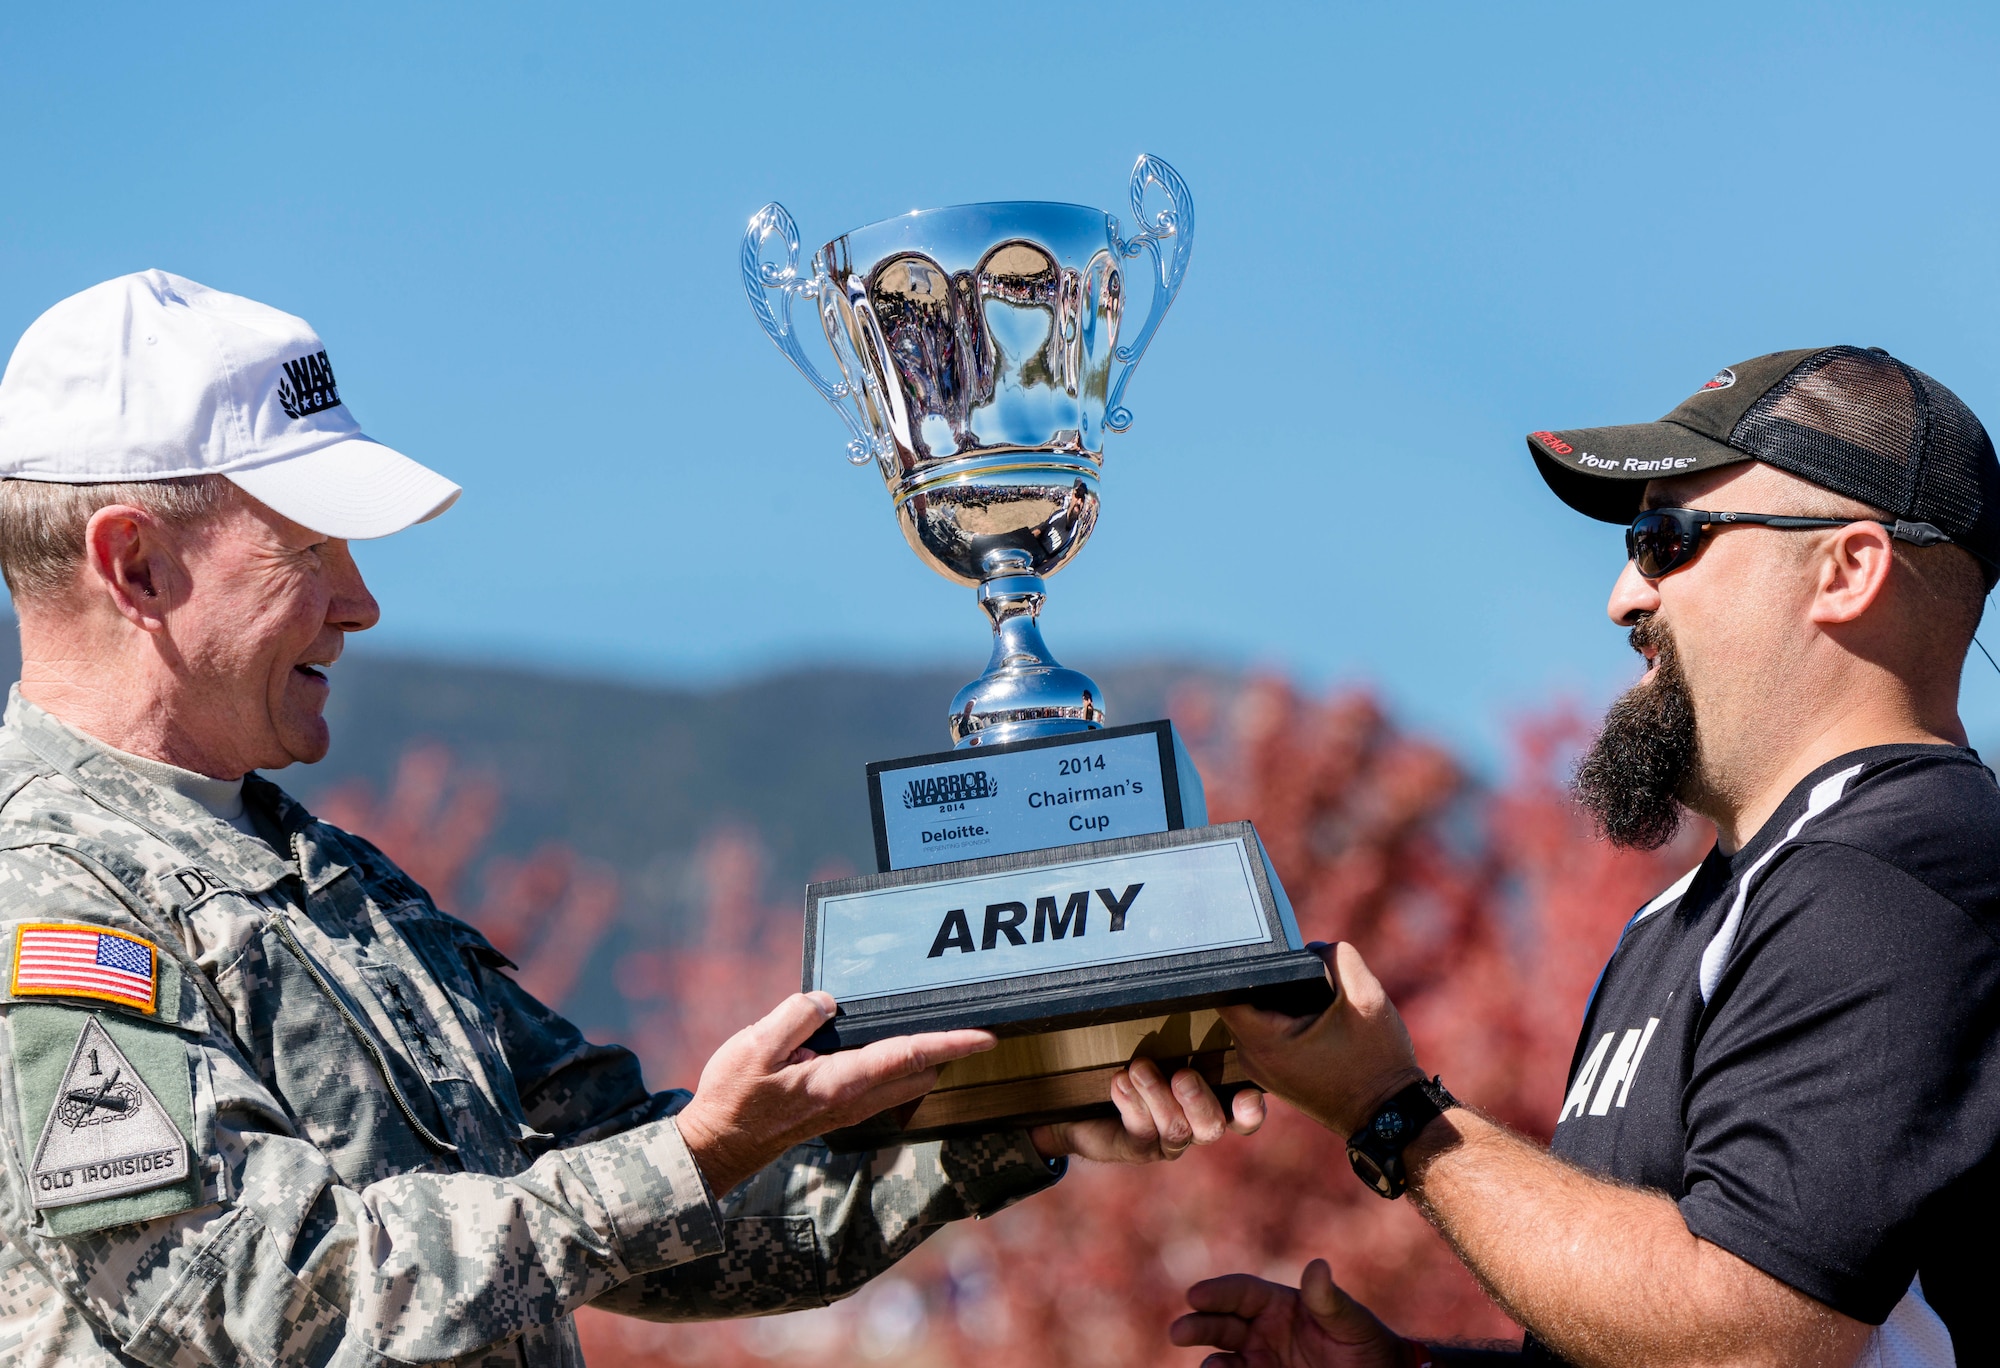 Chairman of the Joint Chiefs of Staff Gen. Martin E. Dempsey presents the Chairman's Cup trophy to the Army team captain Frank Barroquiero Oct. 4, 2014, during the Warrior Games tailgate celebration at the U.S. Air Force Academy's Falcon Stadium in Colorado Springs, Colo. The Chairman's Cup is awarded to the top-performing service branch at the Warrior Games. The Army’s win broke a four-year streak for the Marine Corps. (DOD photo/Army Staff Sgt. Sean K. Harp)  